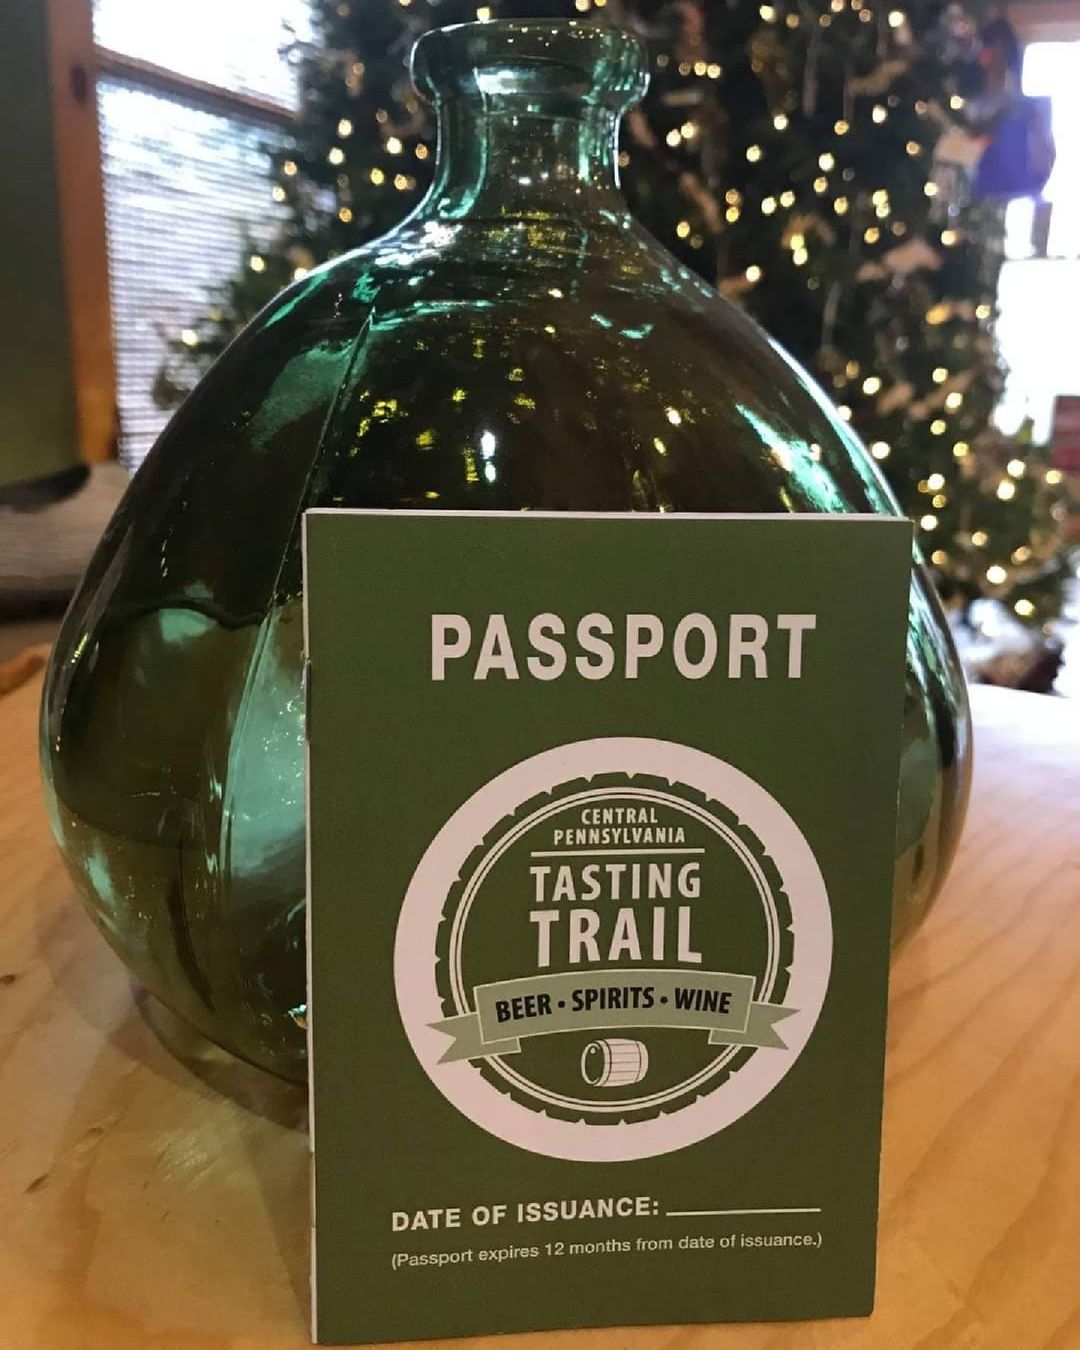 It's not too late! The @centralpatastingtrail's annual holiday passport sale runs from November 26 to December 25, 2021. Buy one passport for $35, get the second one at half price.
Passports give holders special samplings at the Trail's 13 breweries, wi